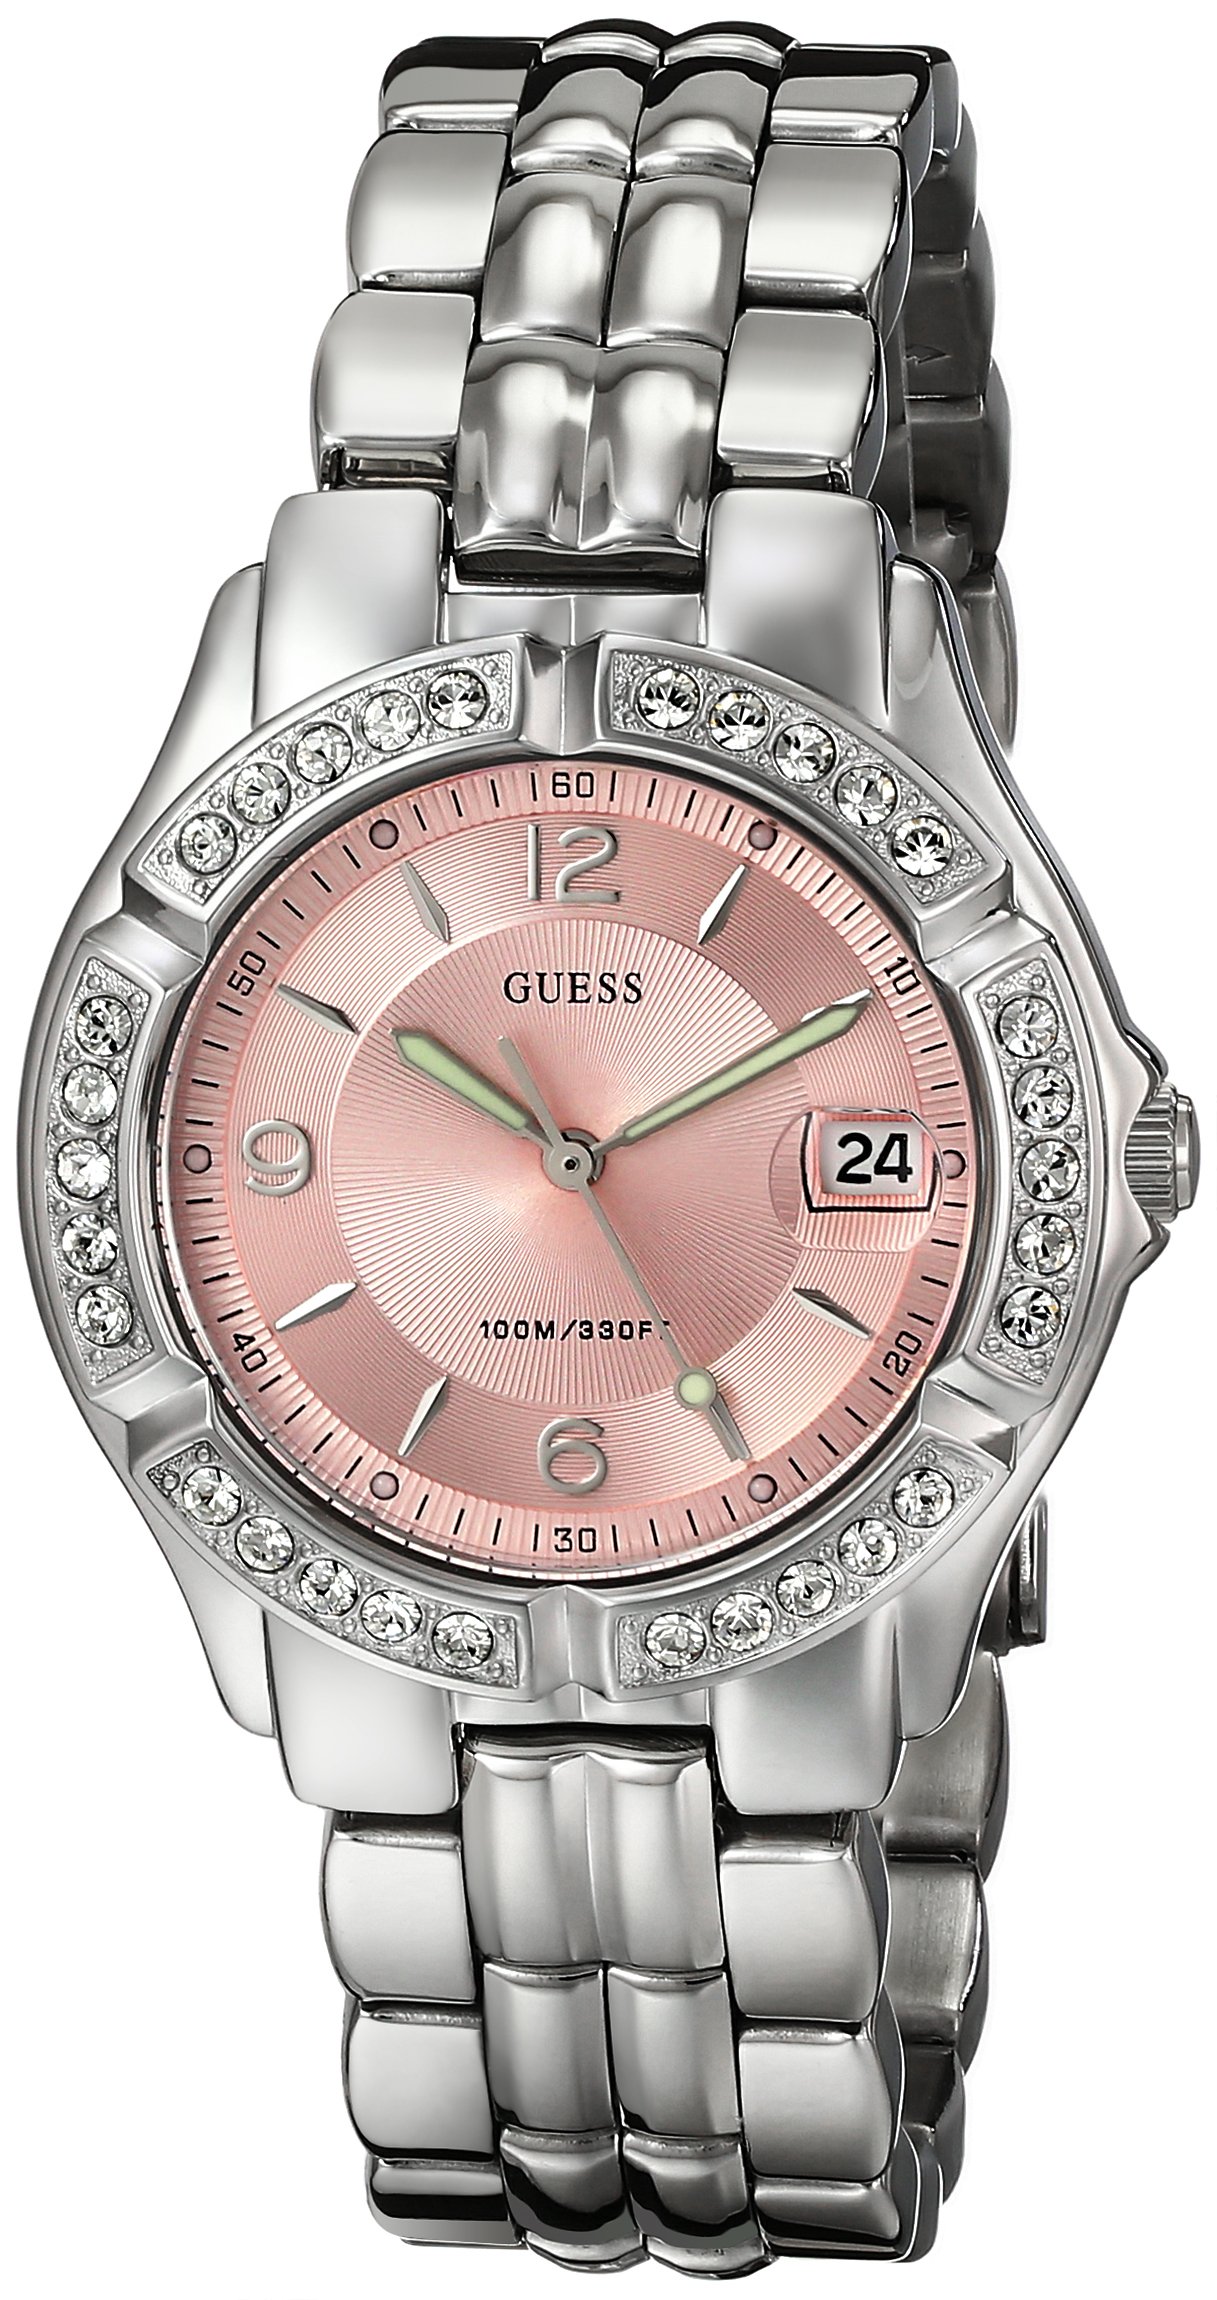 GUESS Bracelet Watch with Date Feature